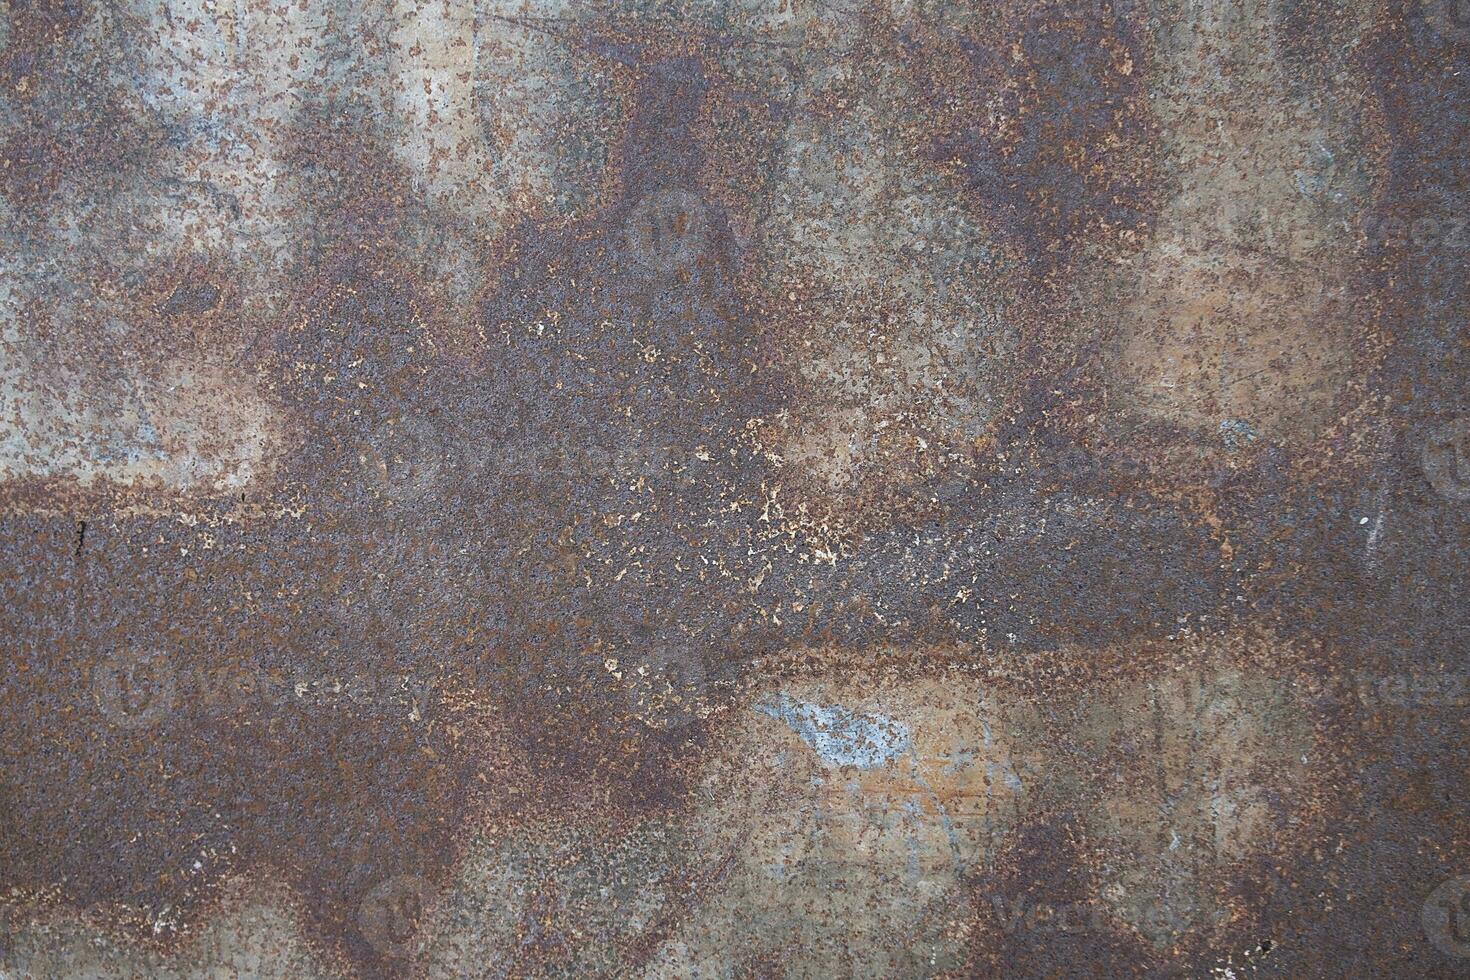 Rust on surface of the old iron photo